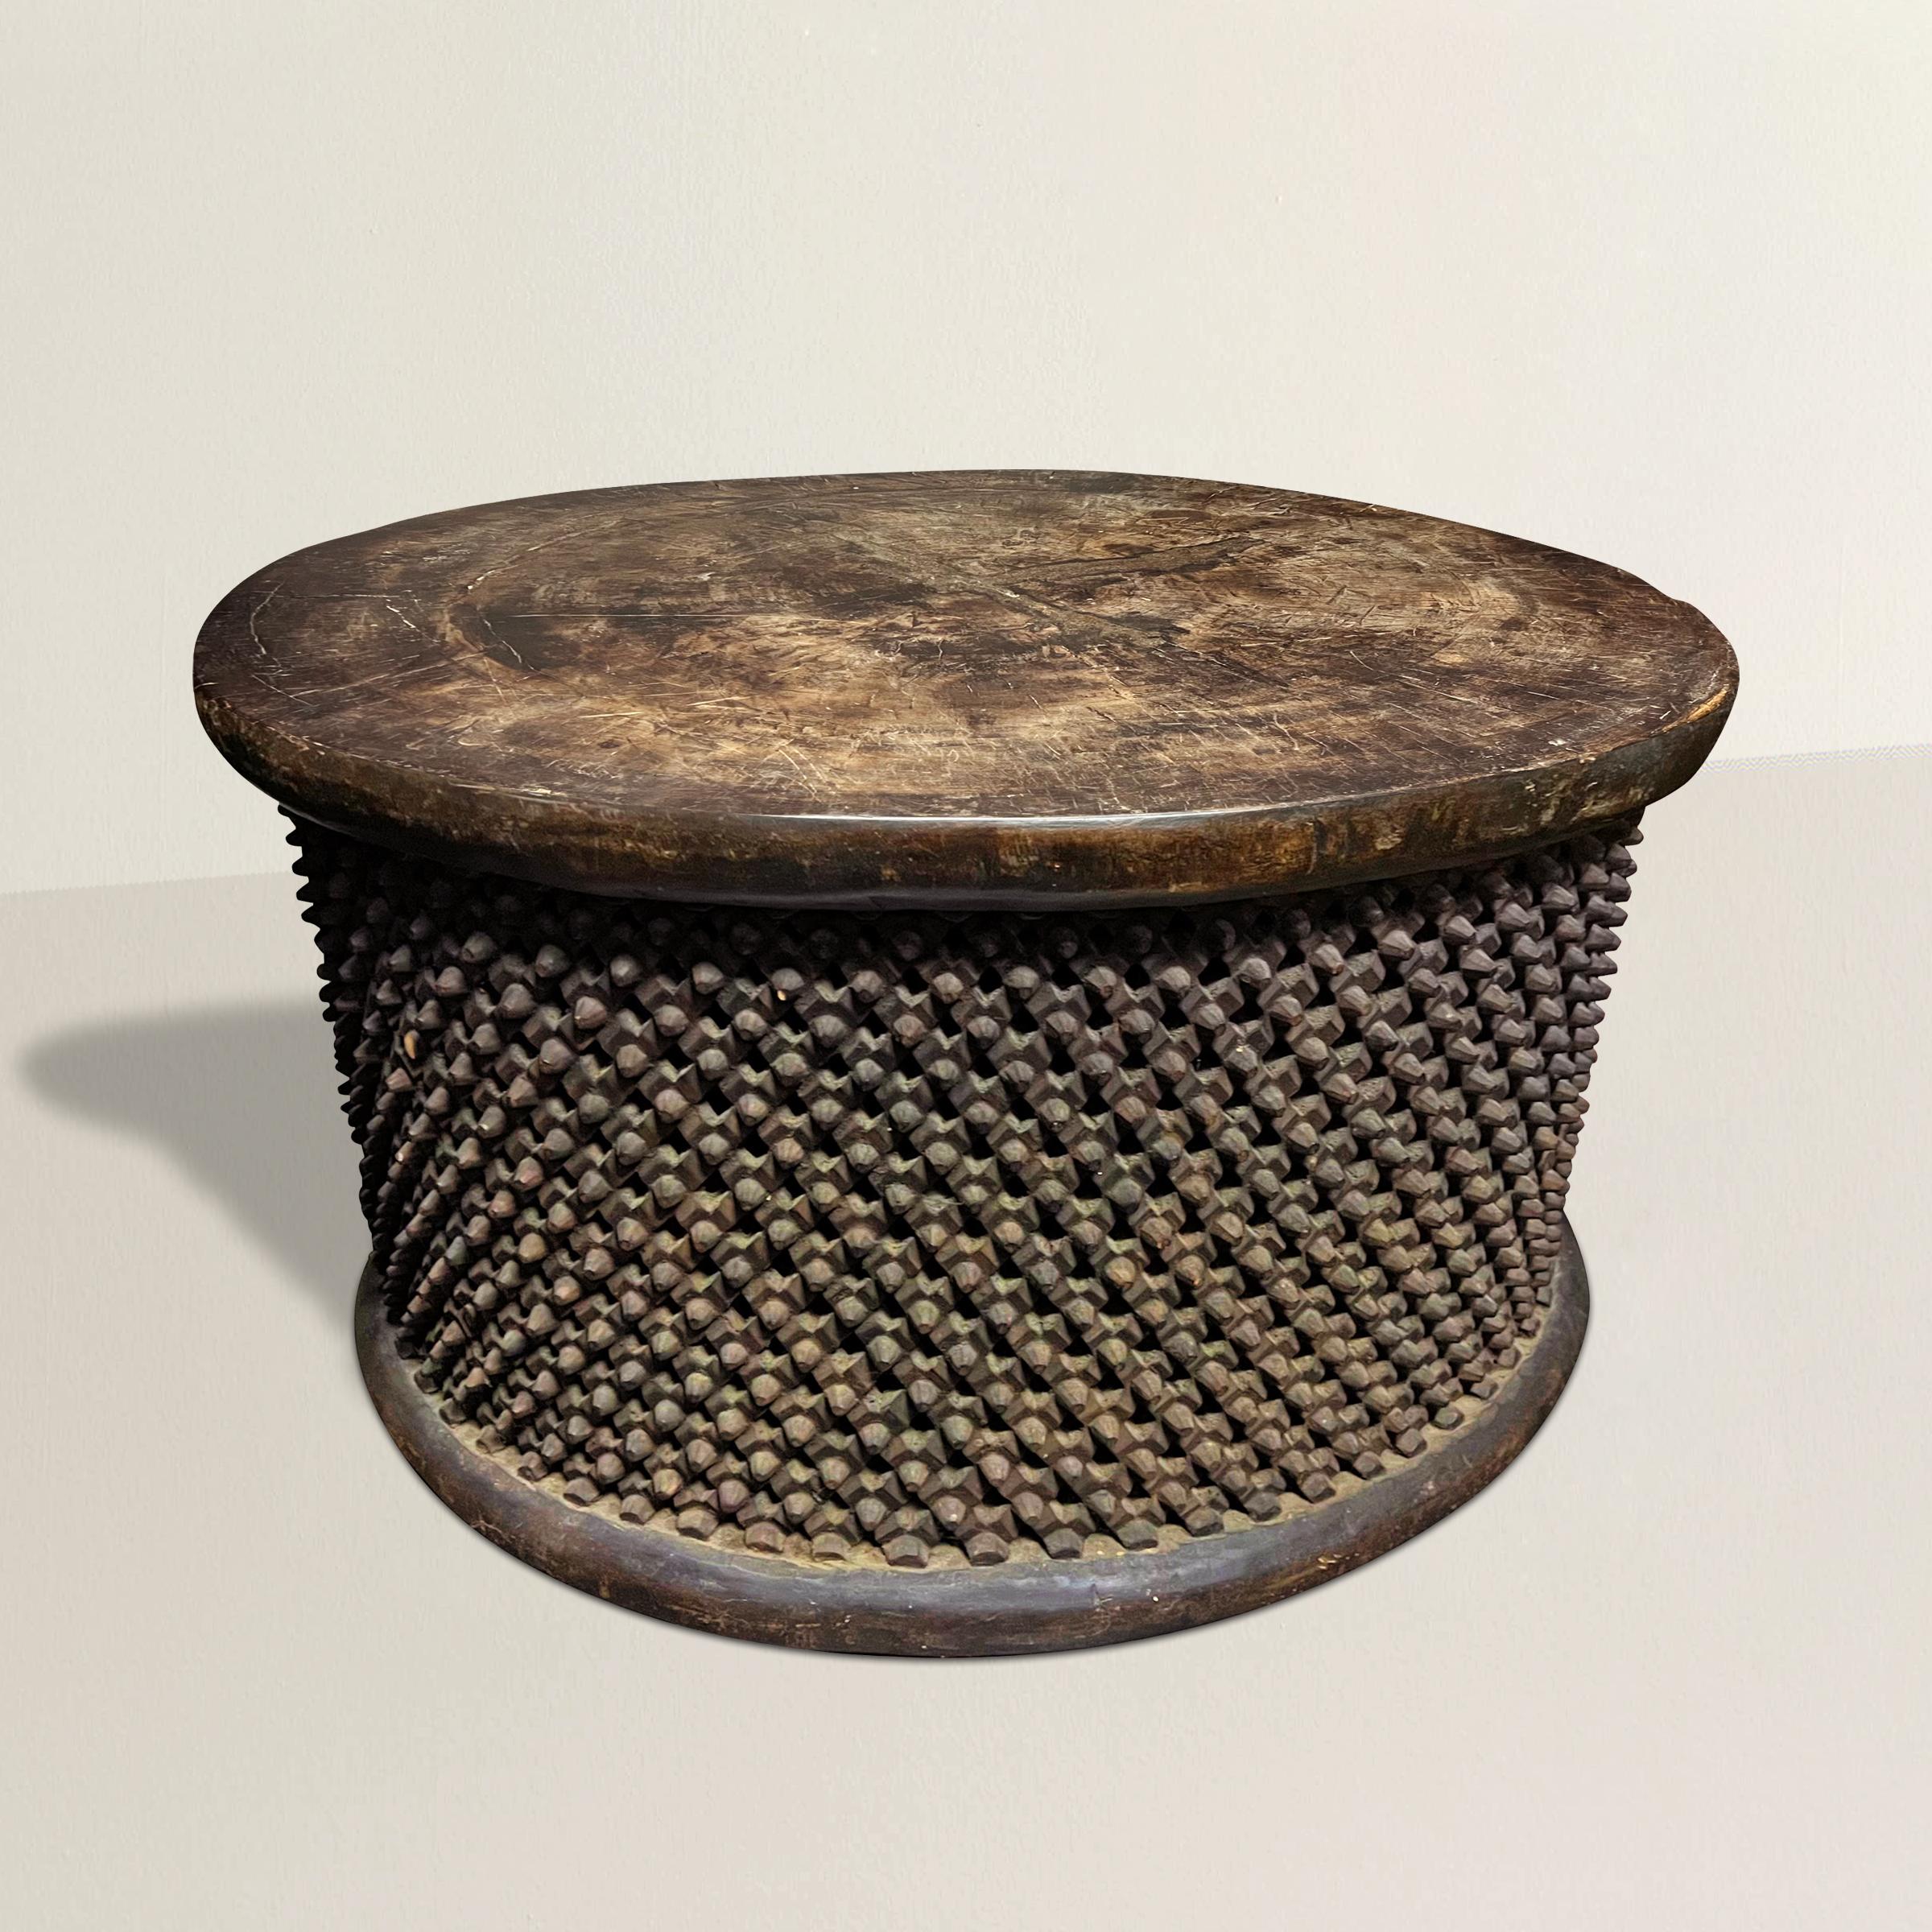 The finest and largest early 20th century Bamileke table we've ever seen! Featuring the most intricately carved 'spider' patterned sides with a wonderful flat, smooth, worn top, this table is carved from a single piece of wood. The perfect coffee